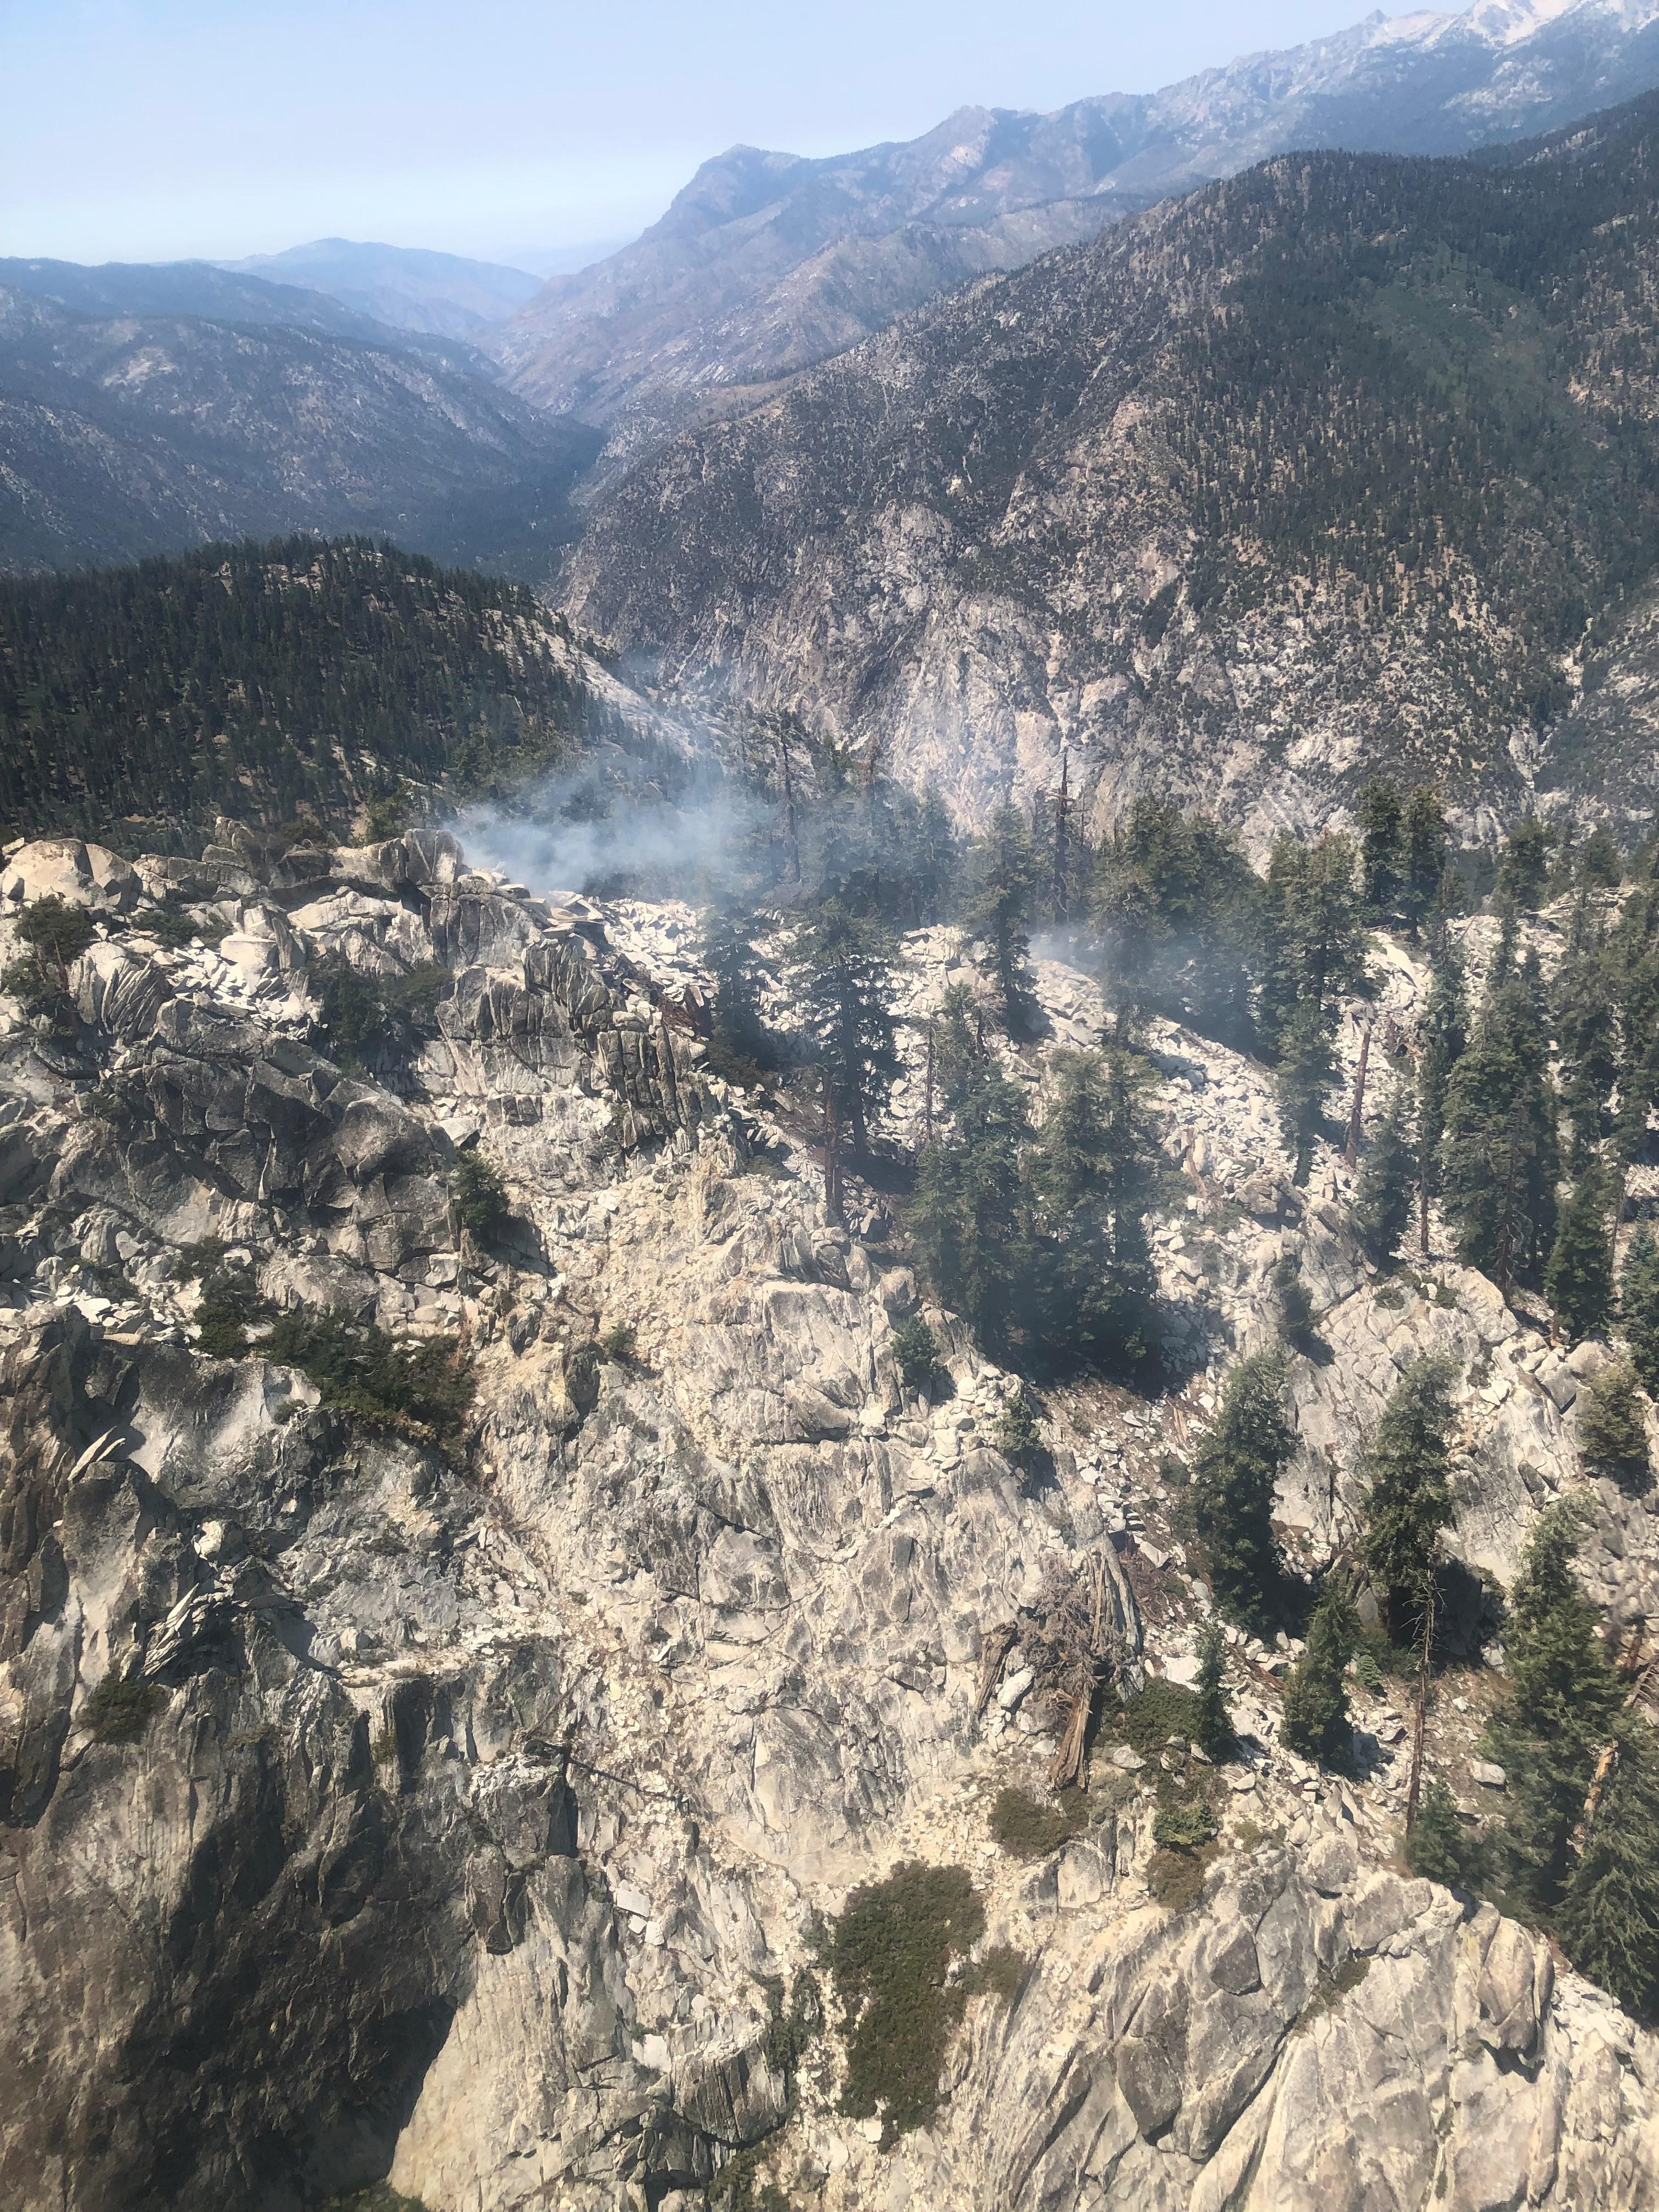 One prominent smoke along the eastern ridge where the fire is burning in a heavy downed log. There are some broken fuels on the east side of the ridge.